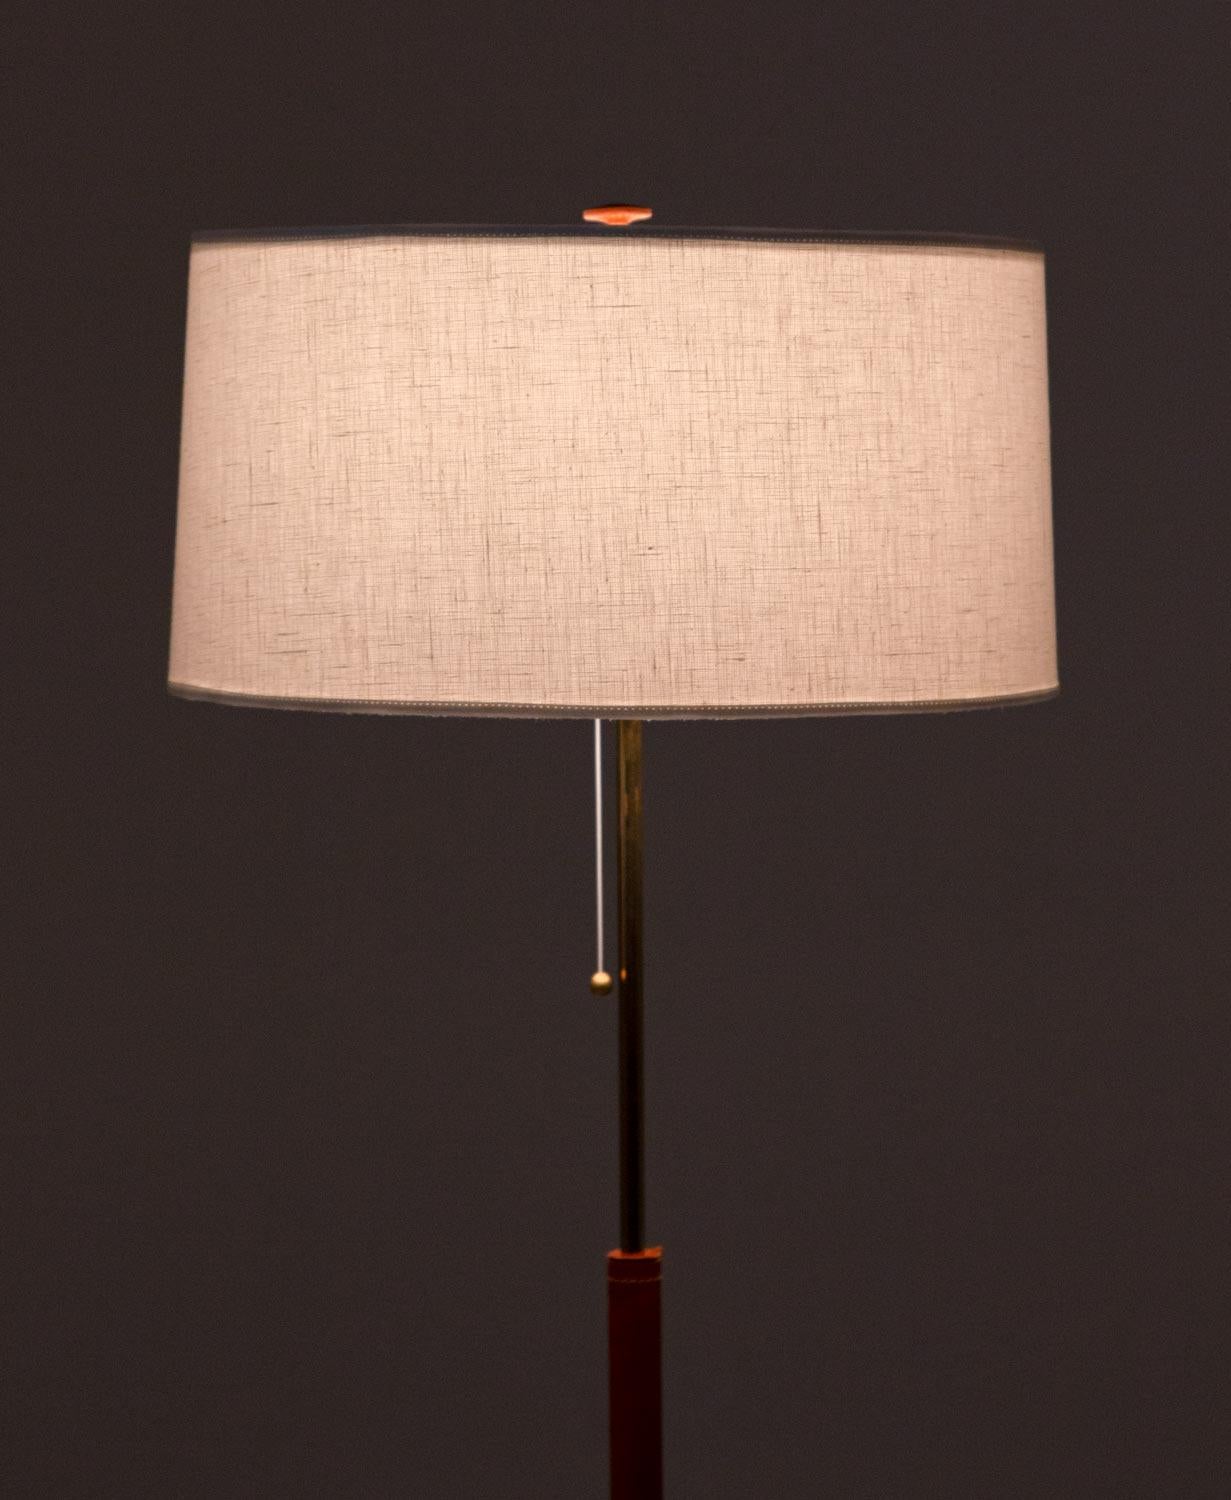 Scandinavian Midcentury Floor Lamp in Brass and Leather by Bergboms, Sweden In Good Condition For Sale In Karlstad, SE